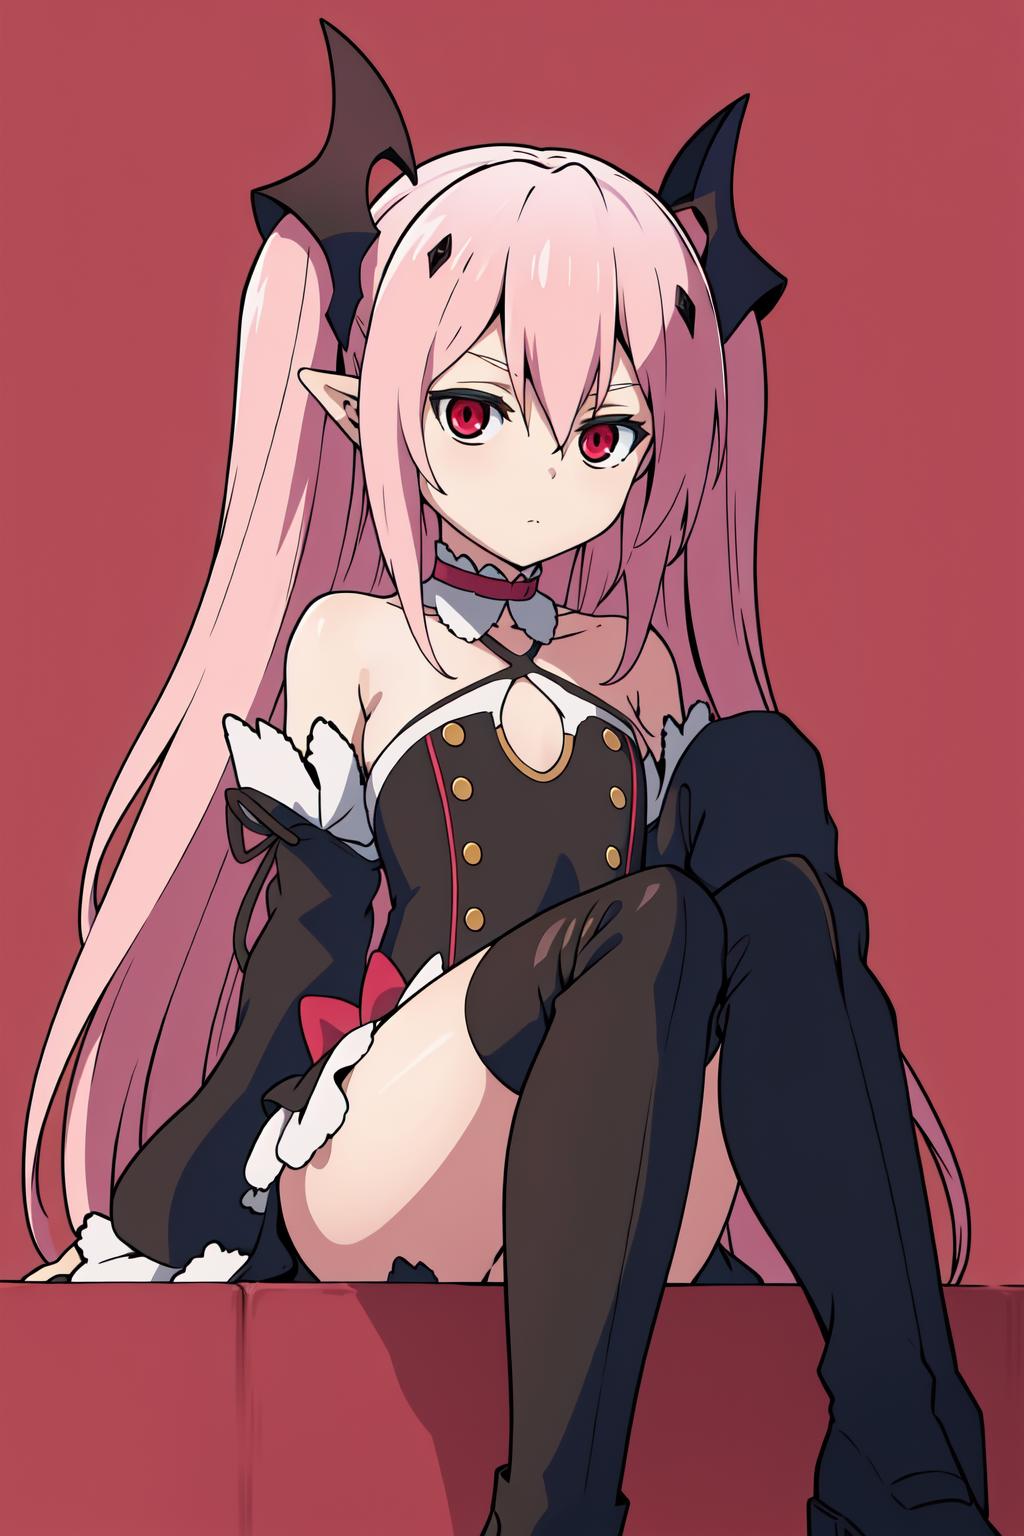 Seraph of the end-克鲁鲁·采佩西/Krul Tepes image by Archetto